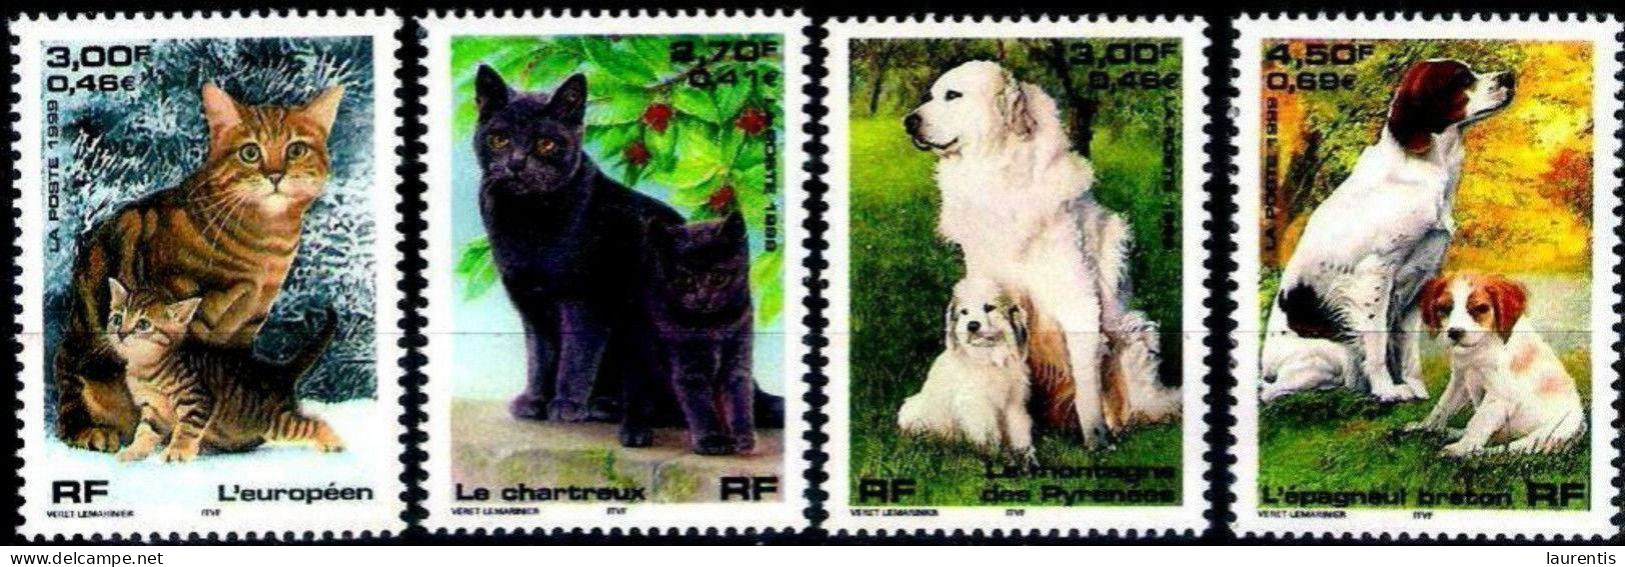 222  Cats - Chats - Dogs - Chiens - France 1999 - MNH - 2,25 - Domestic Cats